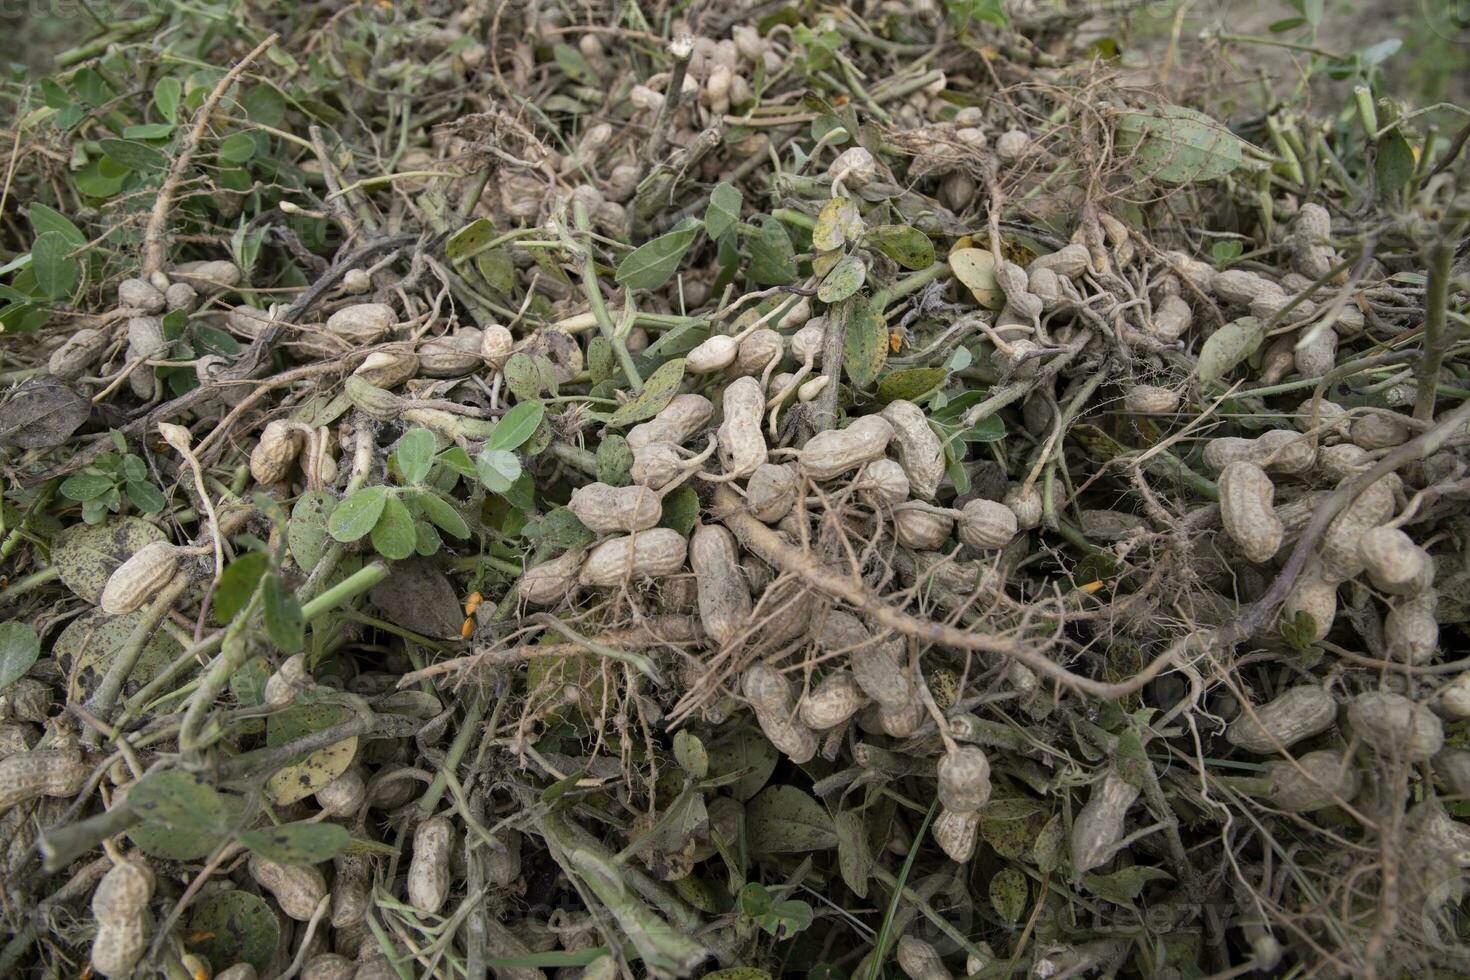 Stacked harvest peanuts in the soil in the field photo